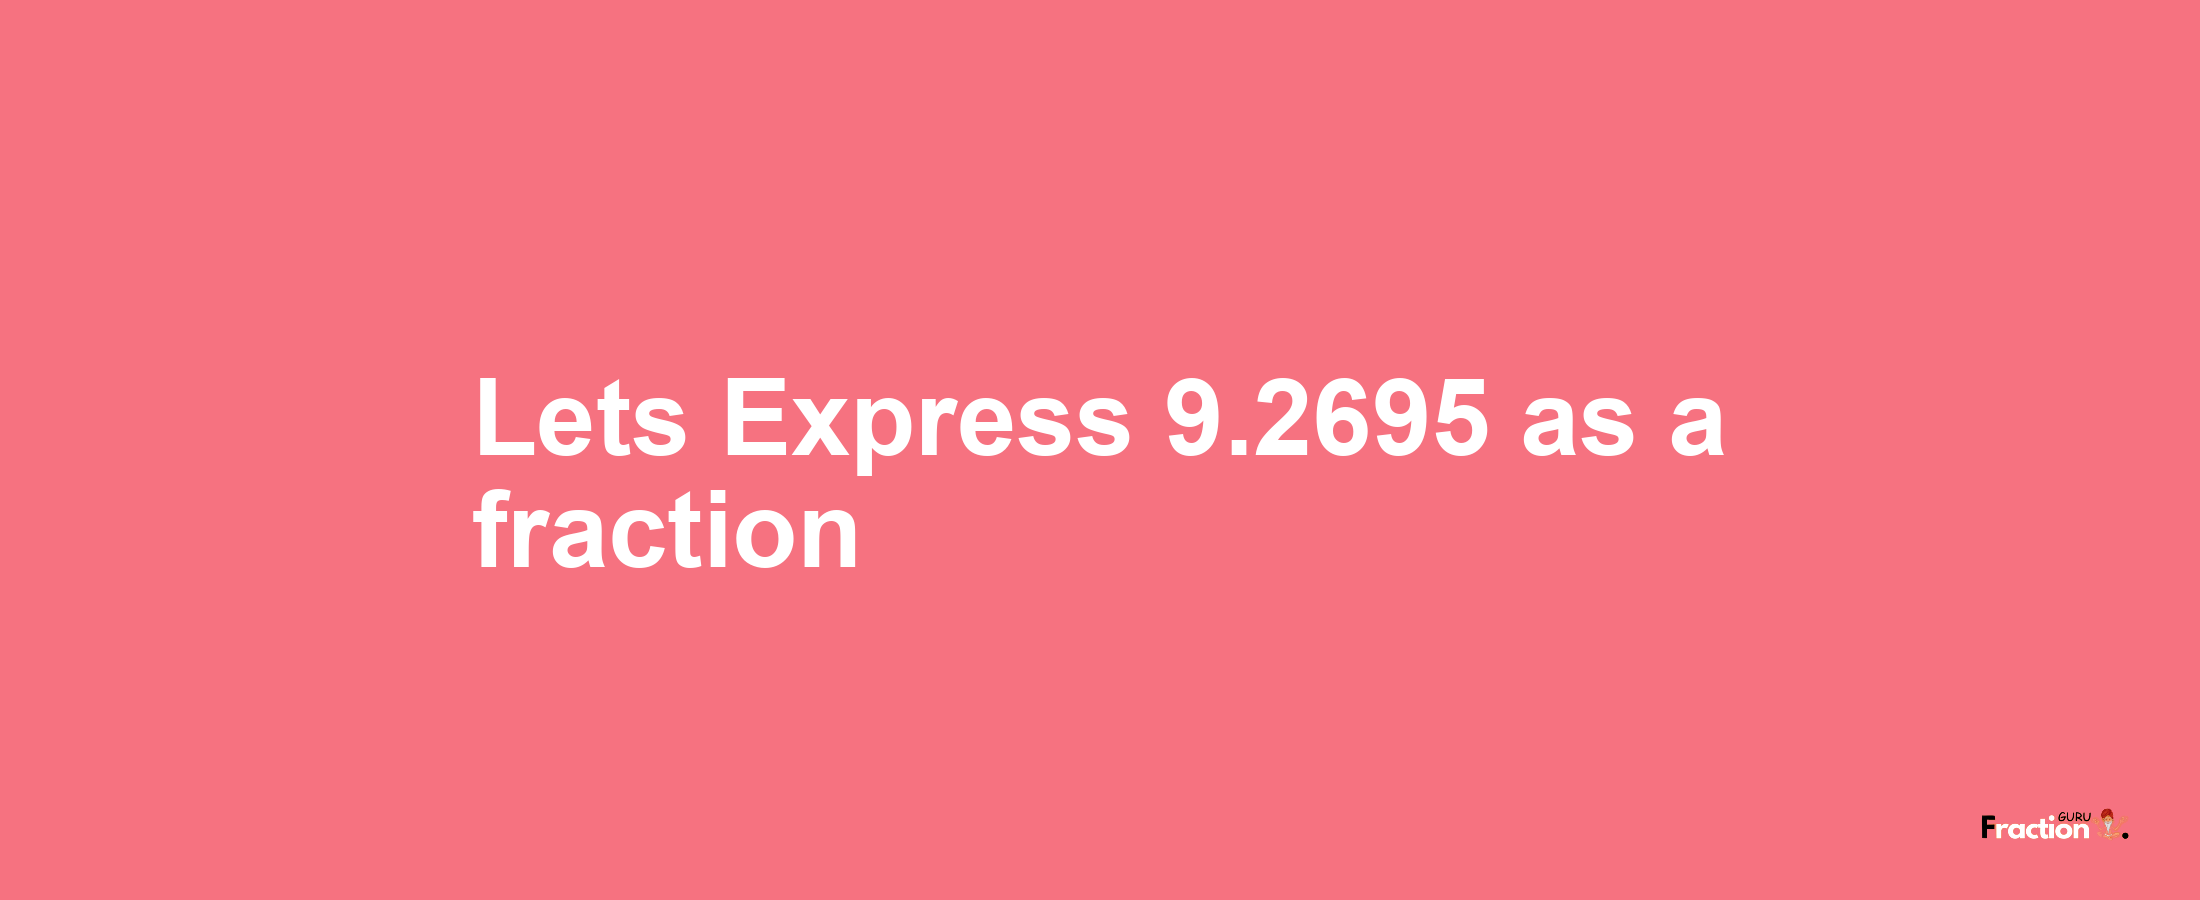 Lets Express 9.2695 as afraction